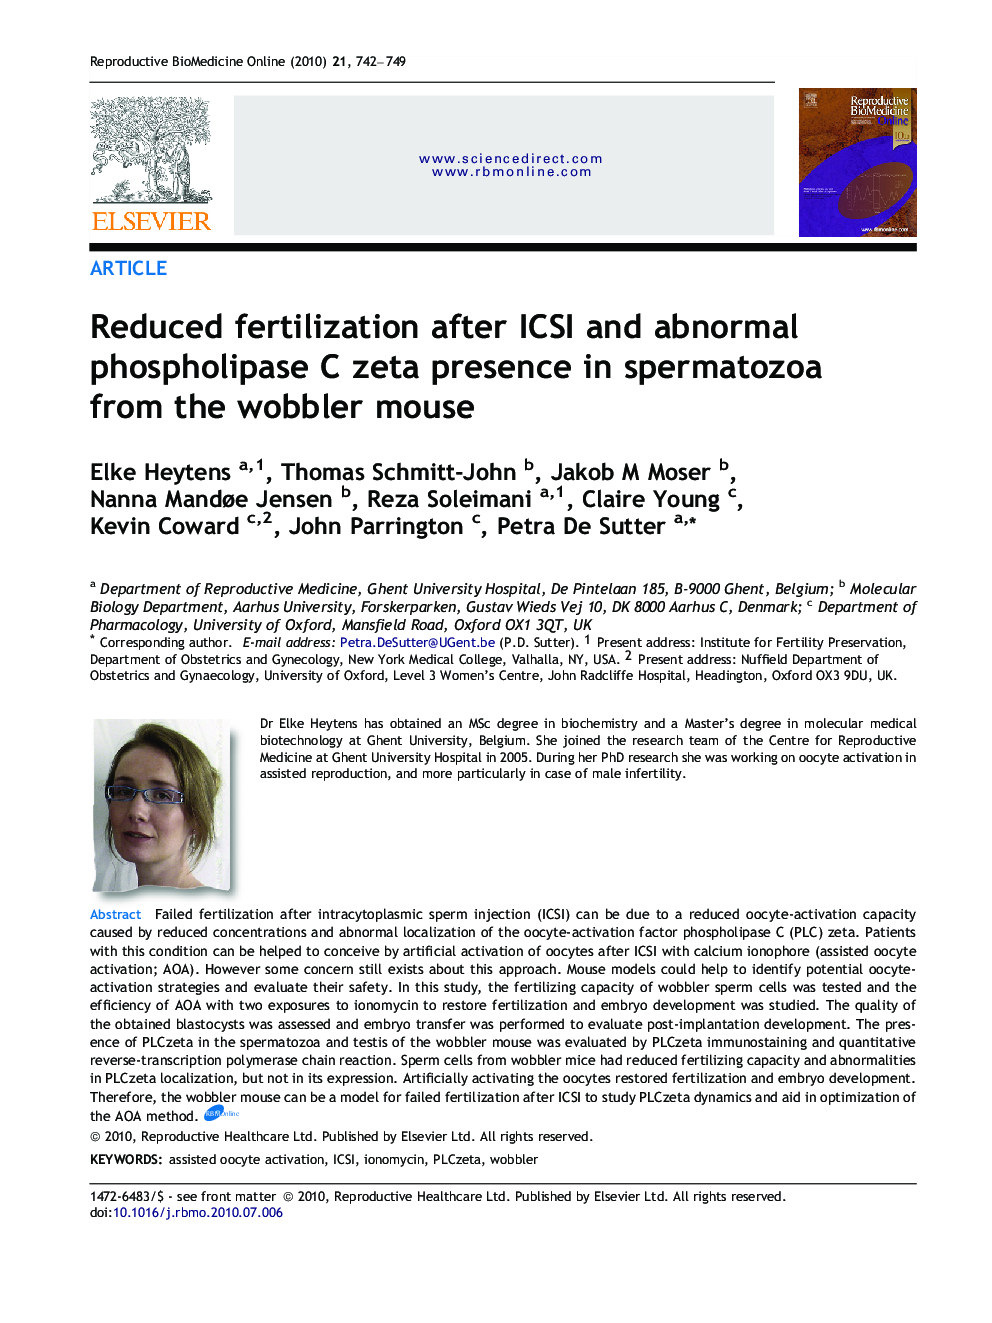 Reduced fertilization after ICSI and abnormal phospholipase C zeta presence in spermatozoa from the wobbler mouse 